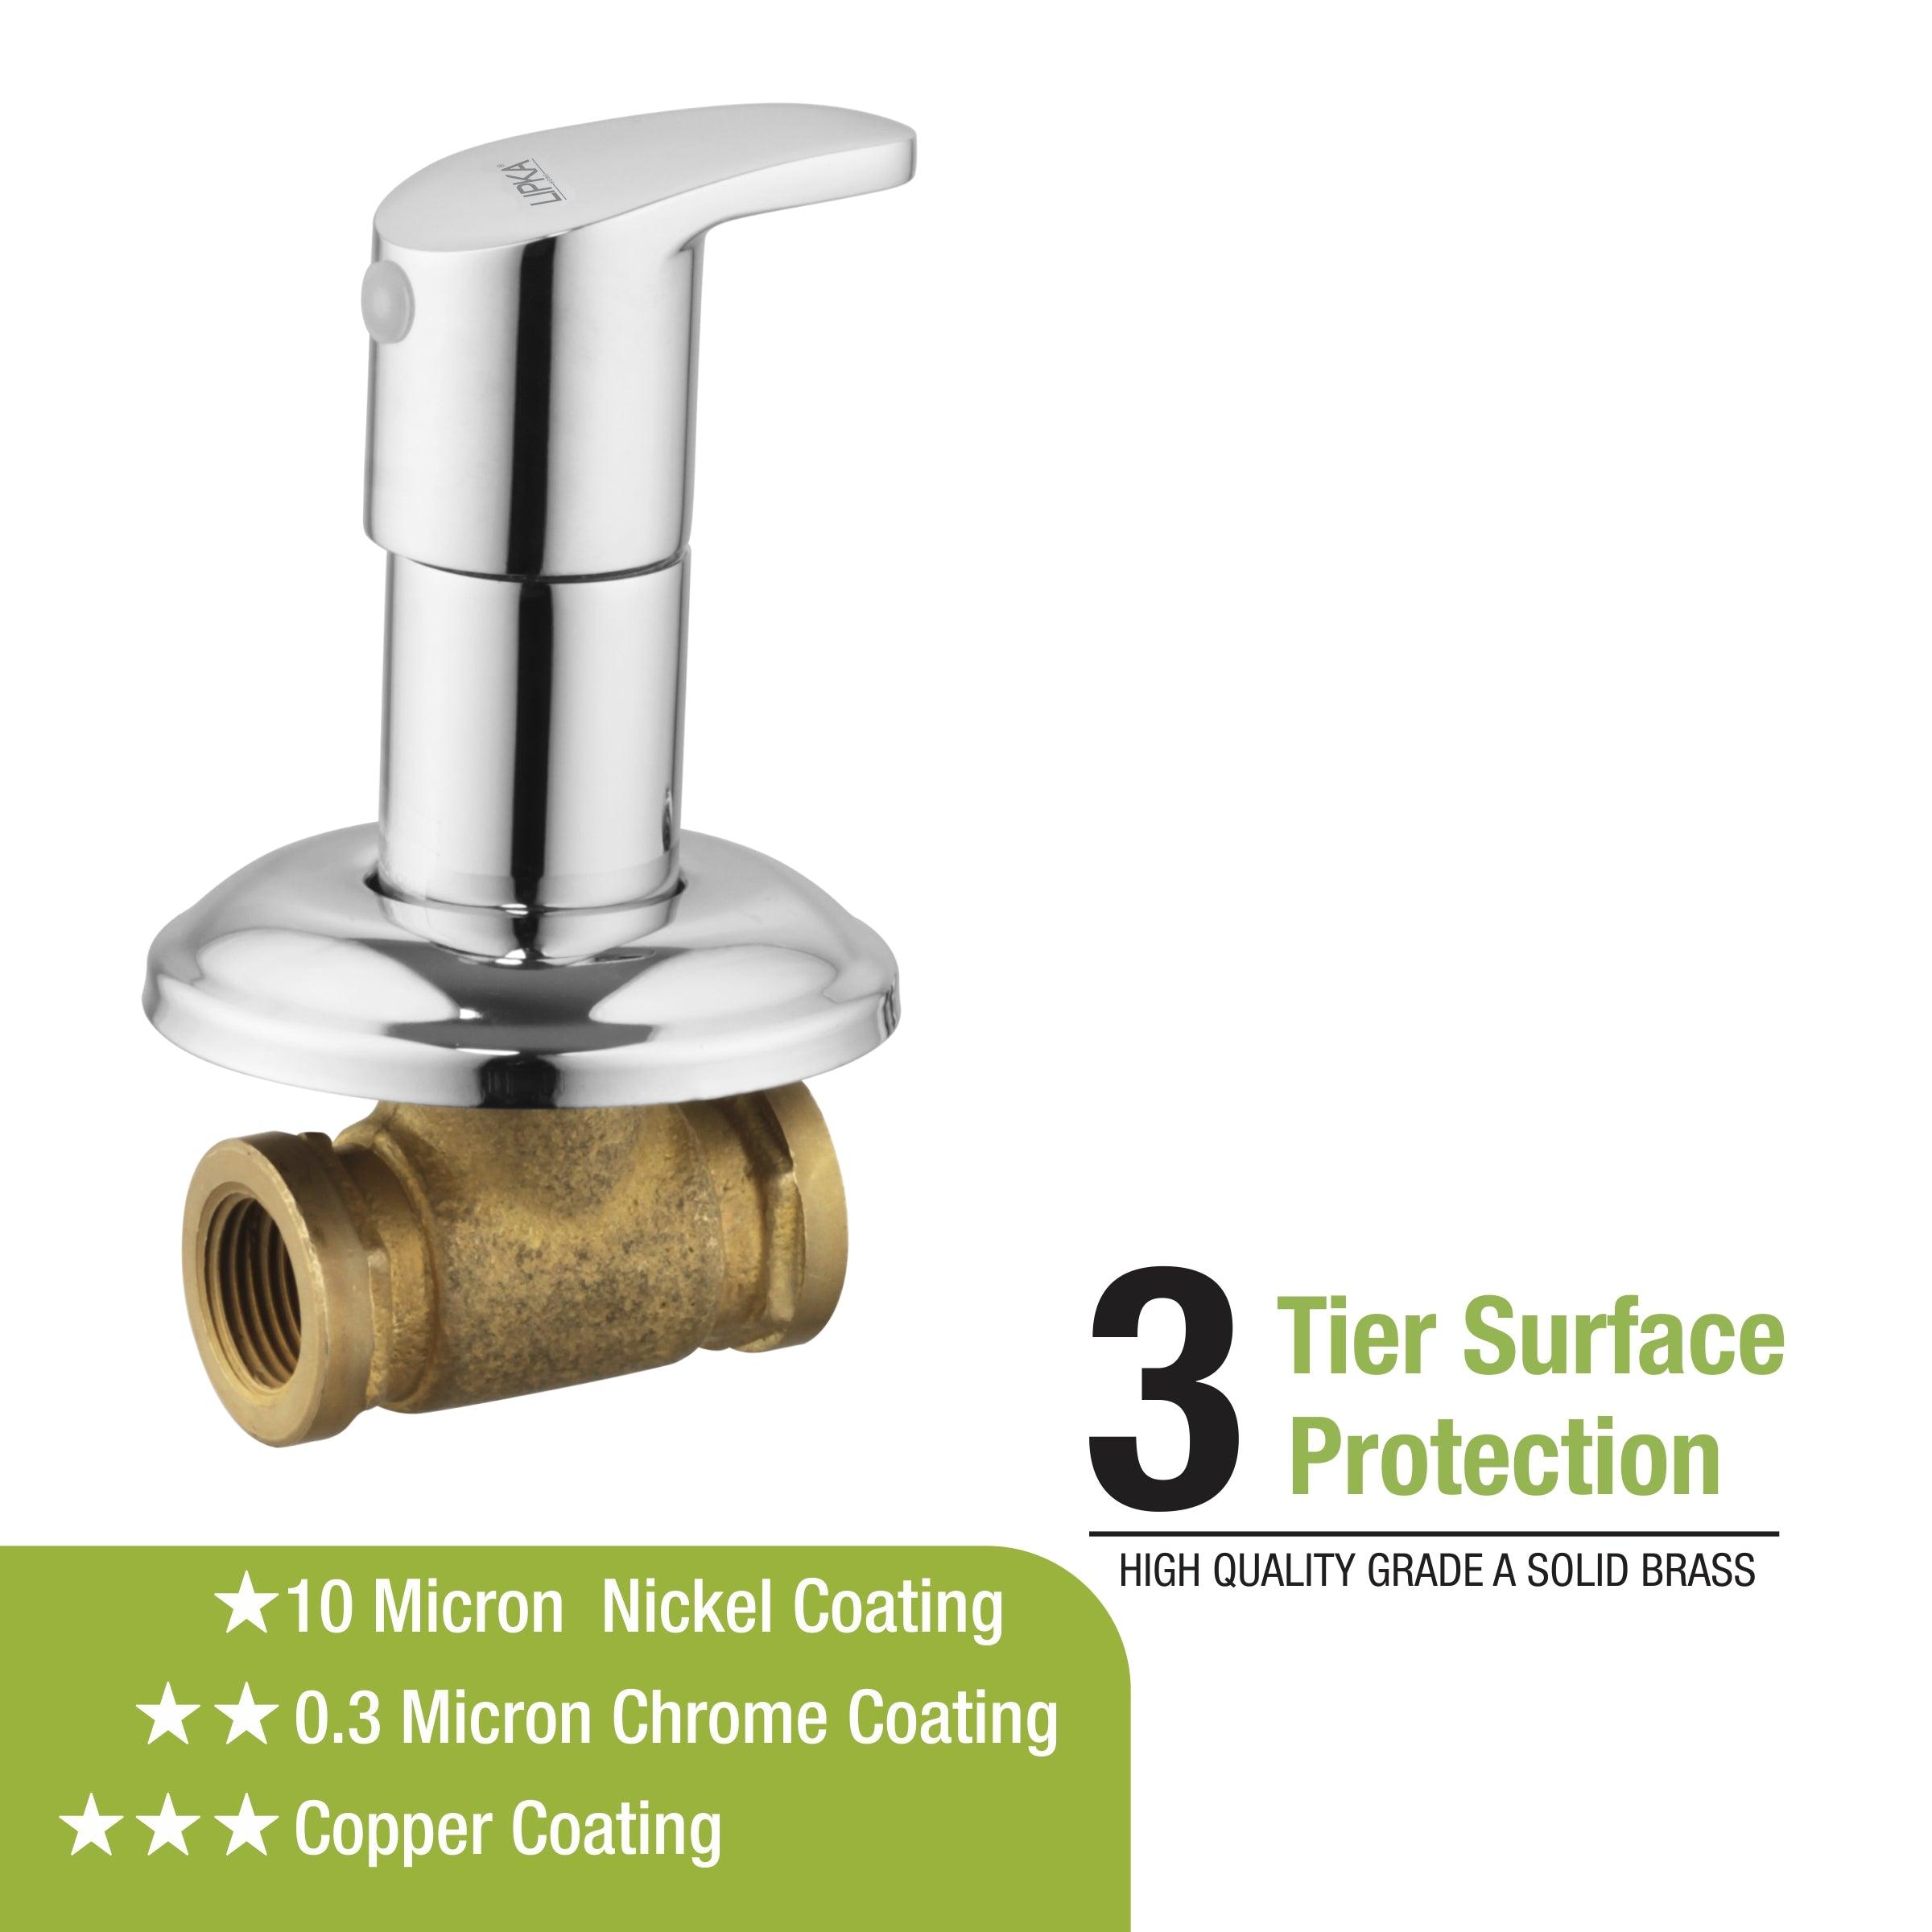 Apple Concealed Stop Valve 15mm Brass Faucet 3 tier surface protection